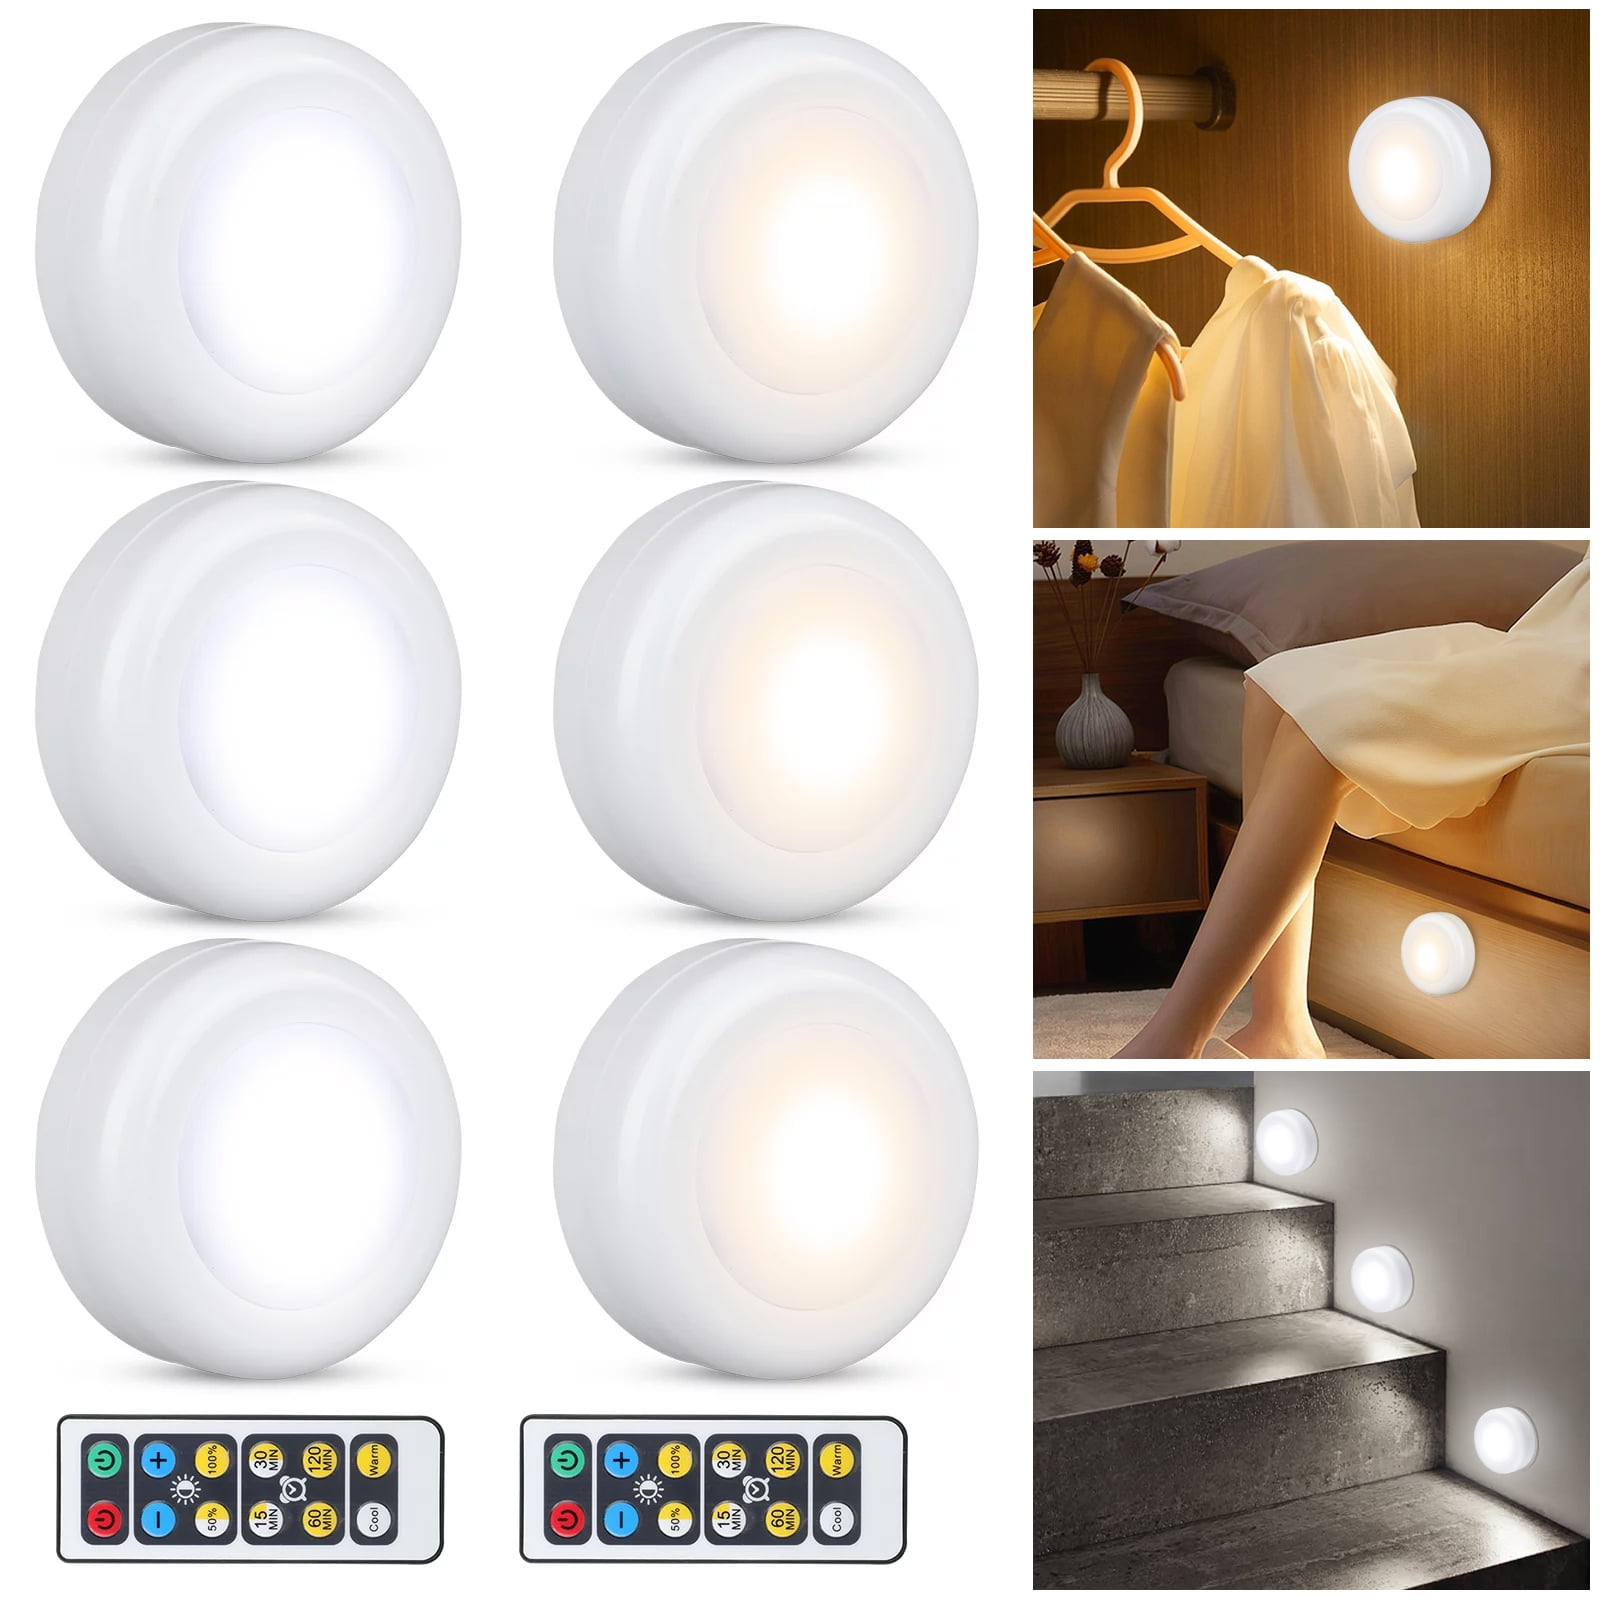 Flyve drage biograf klap 6pcs LED Puck Lights with Remote, TSV Wireless LED Closet Lights Battery  Operated, Under Cabinet Lighting, Dimmable Cabinet Light for Kitchen Stairs  Bathroom Bedroom - Walmart.com